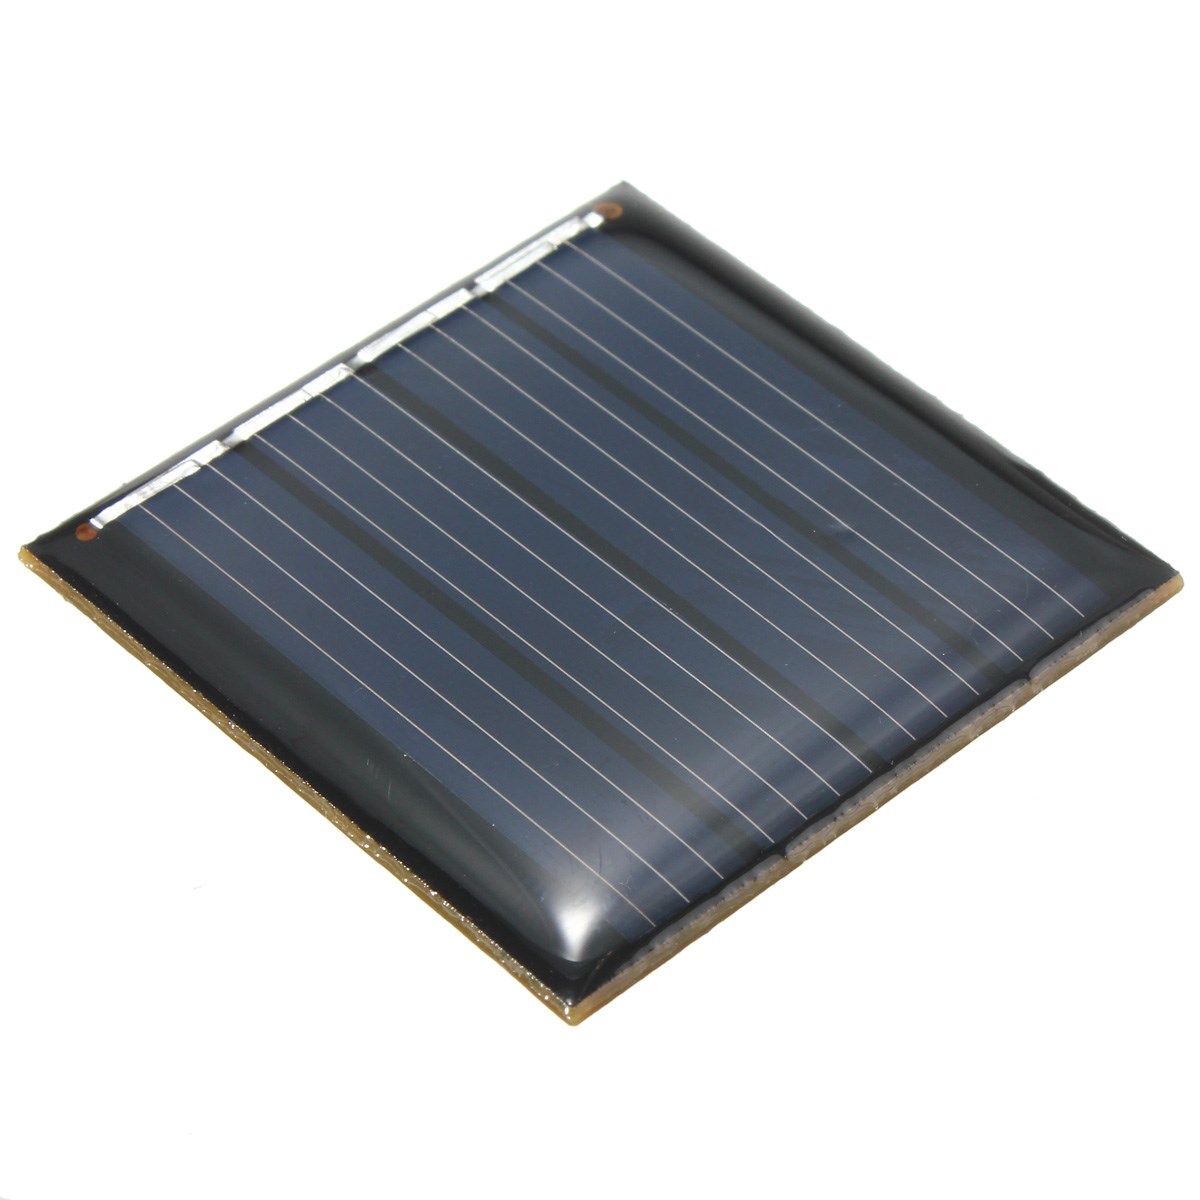 2V 0.14W Epoxy Battery Plate Polycrystalline Silicon Cell Batteries DIY Solar Powered Panels Solar Panel Cell Model 40 x 40x3mm 4